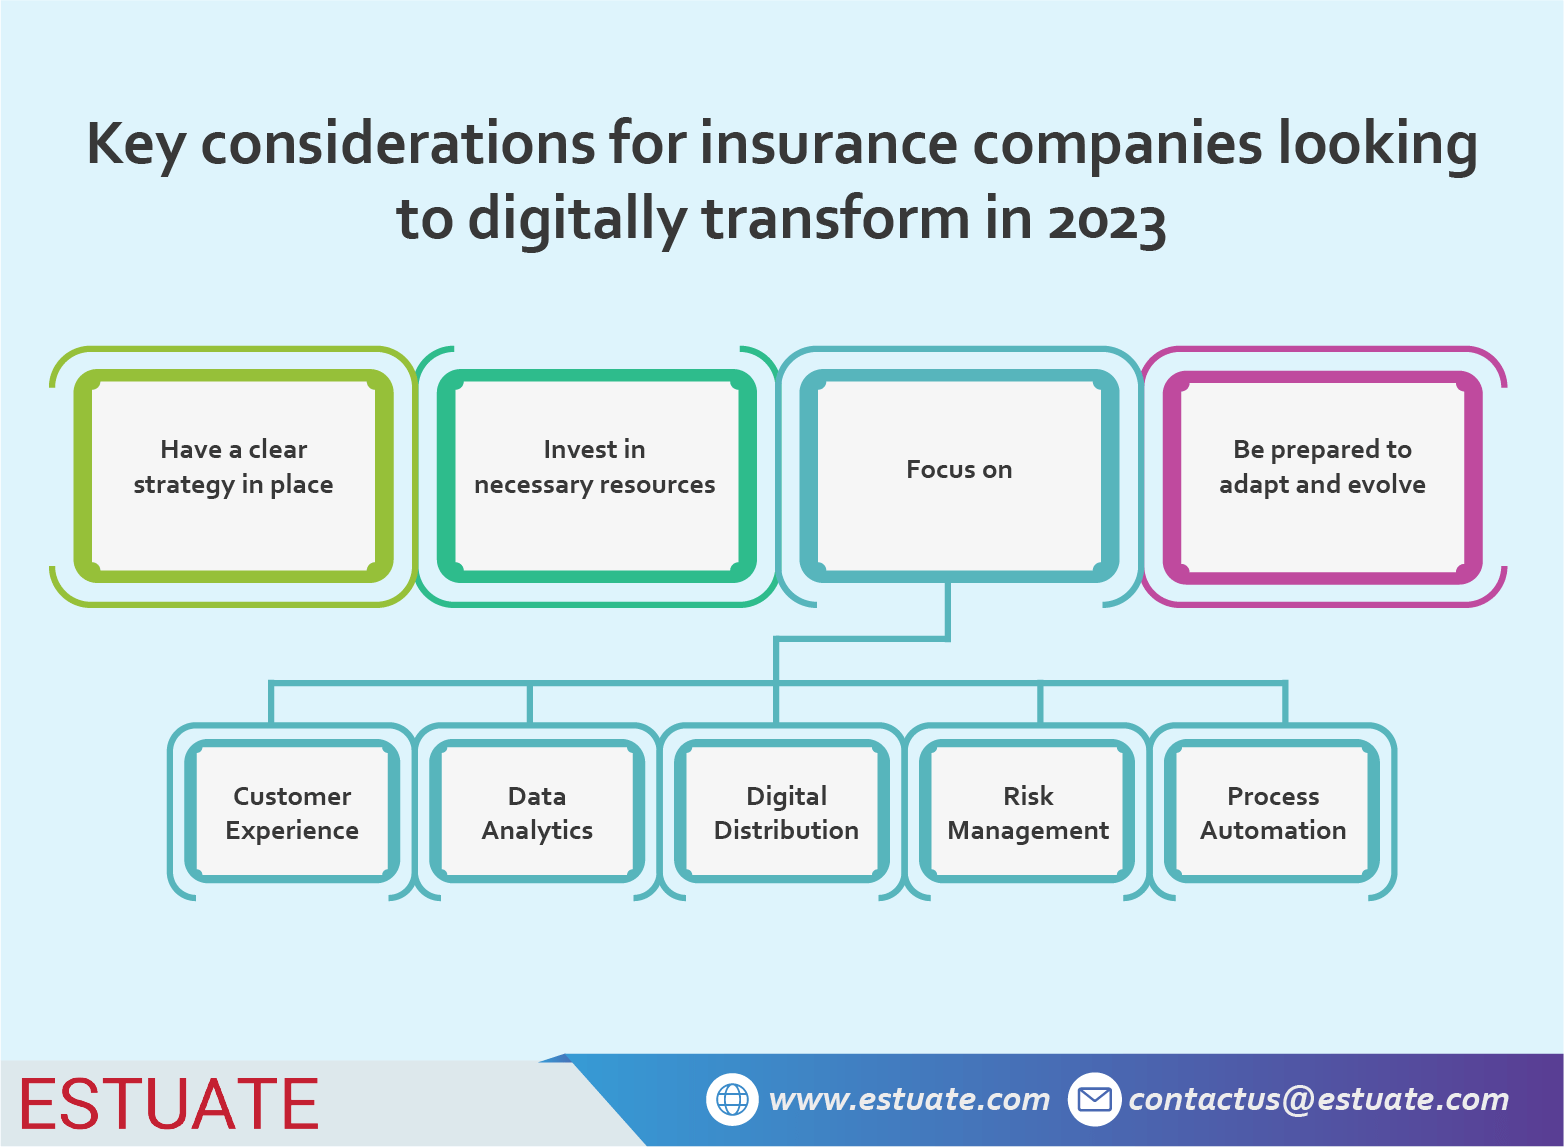 Key considerations for insurers